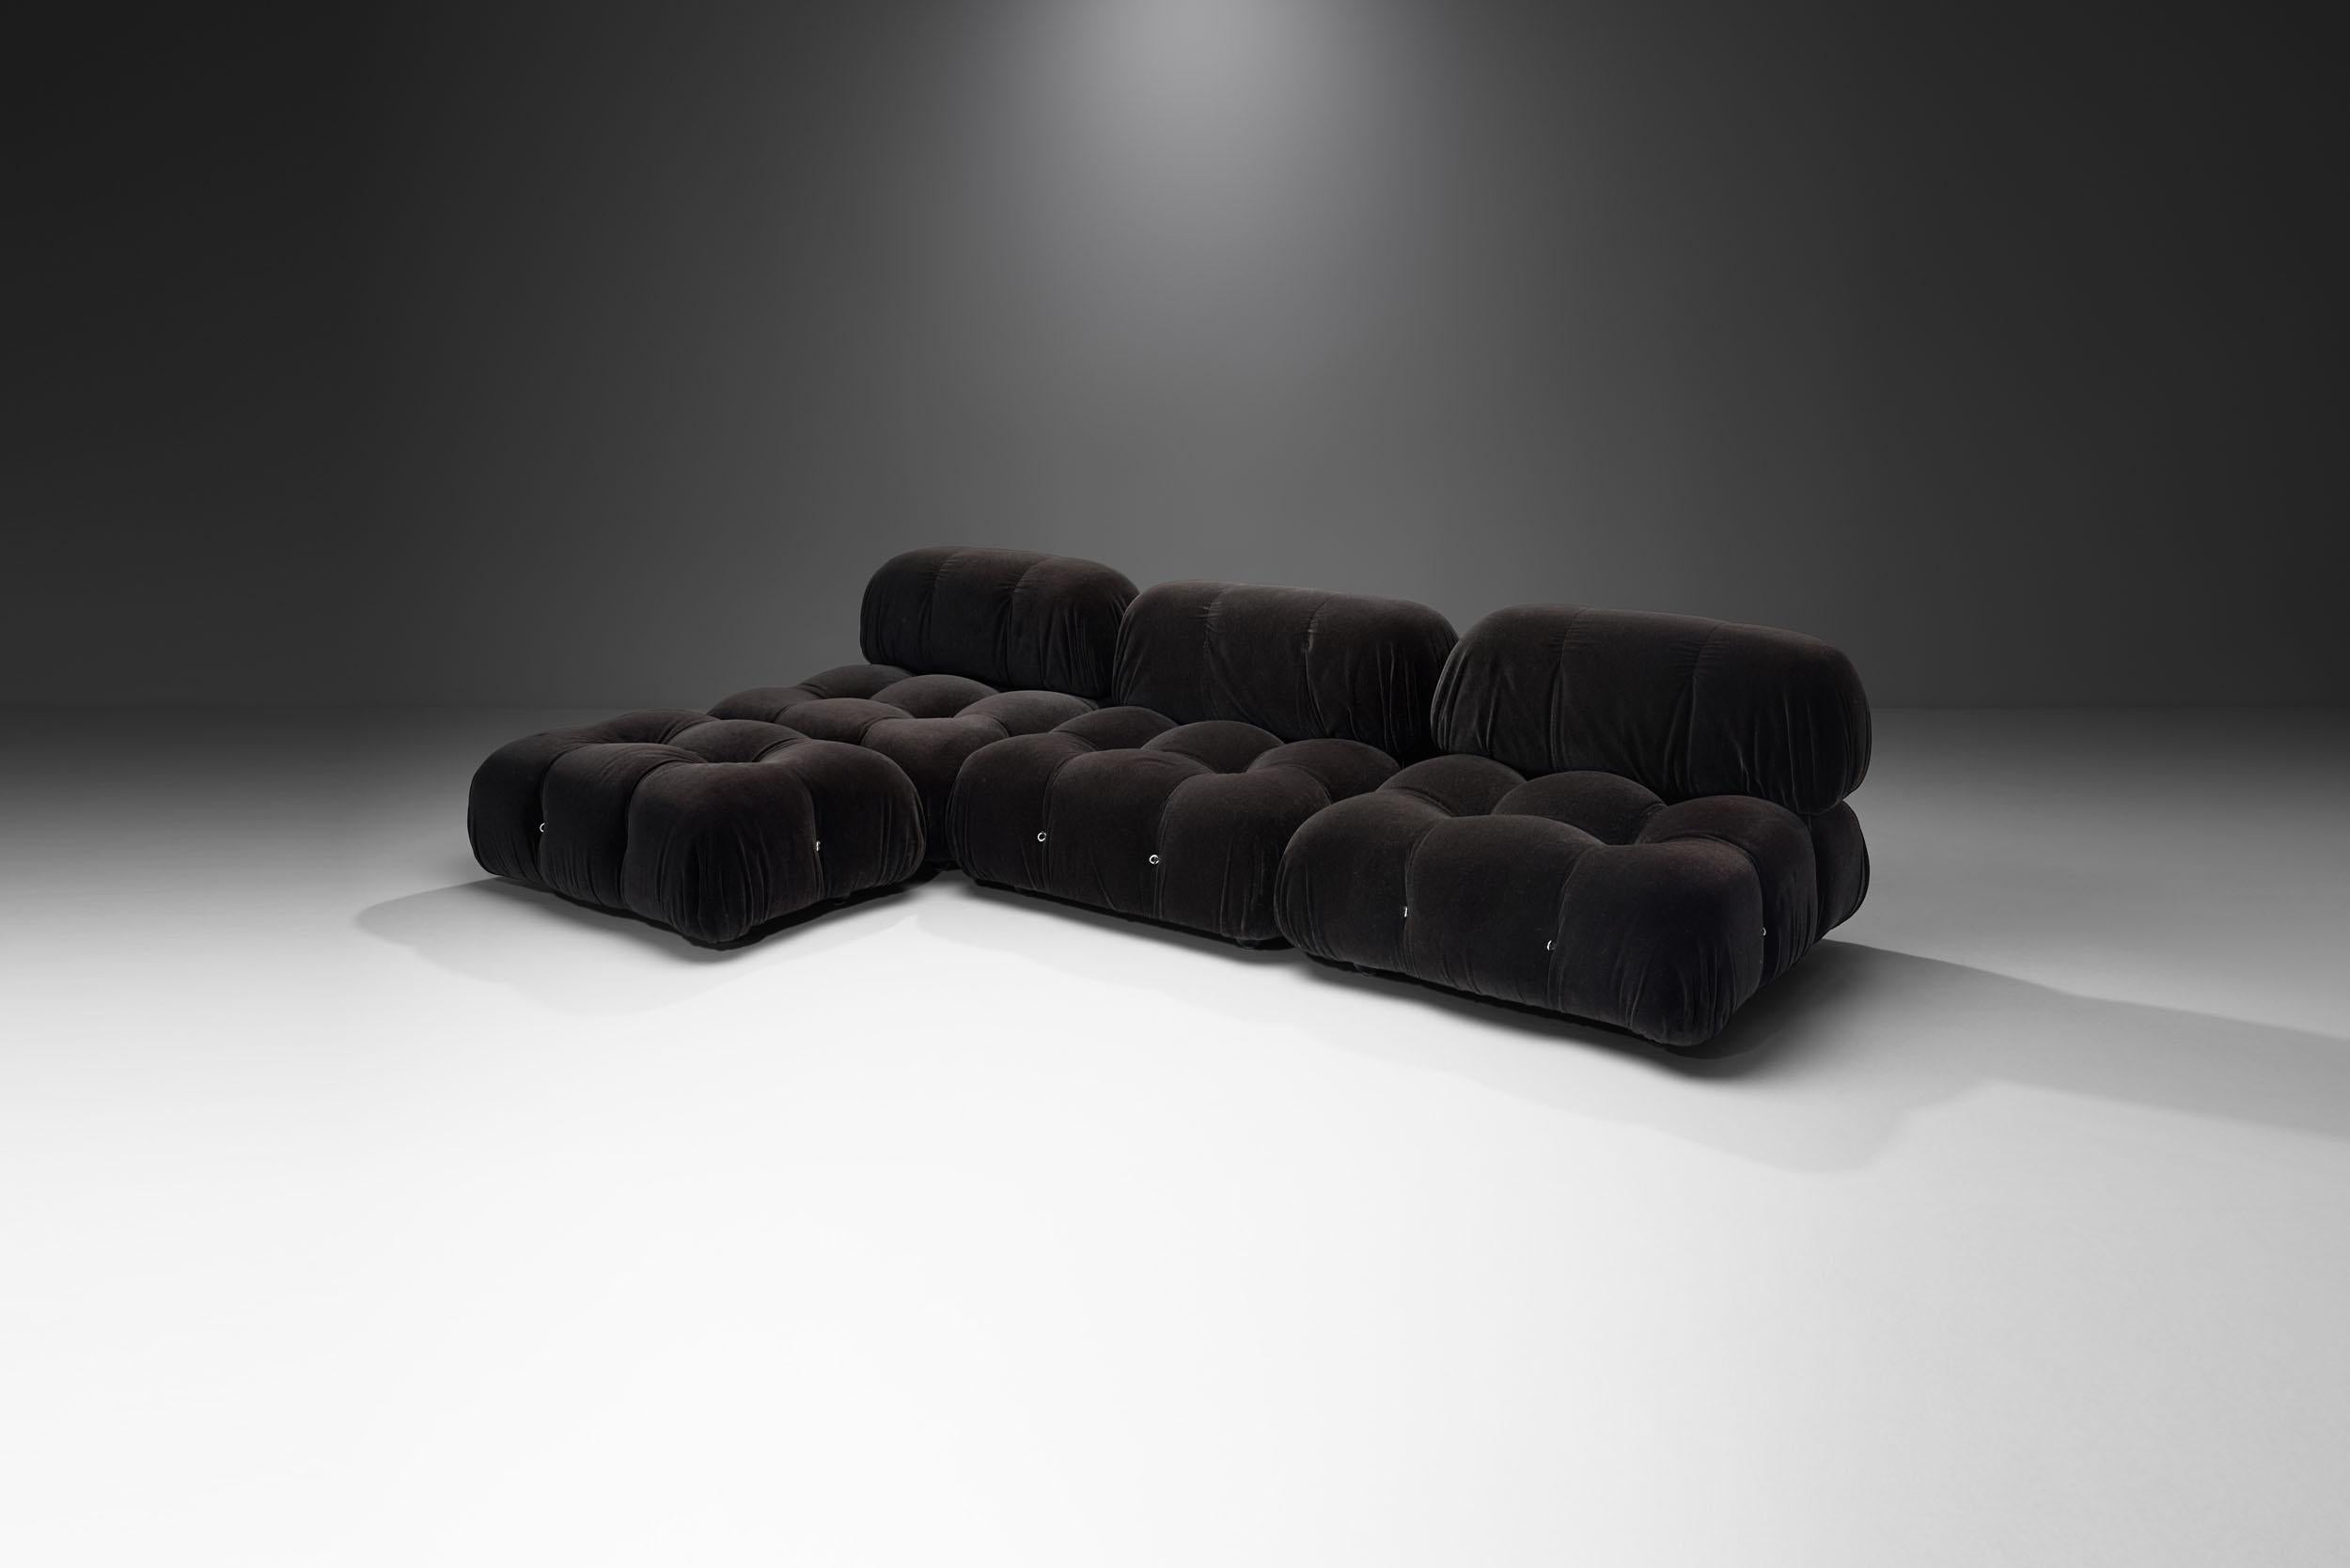 The “Camaleonda” (Chameleon) sofa is Mario Bellini’s contemporary classic. The playful, modular design offers endless options for the user, which also inspired the model’s name. Camaleonda has passed through five decades of design history as a true